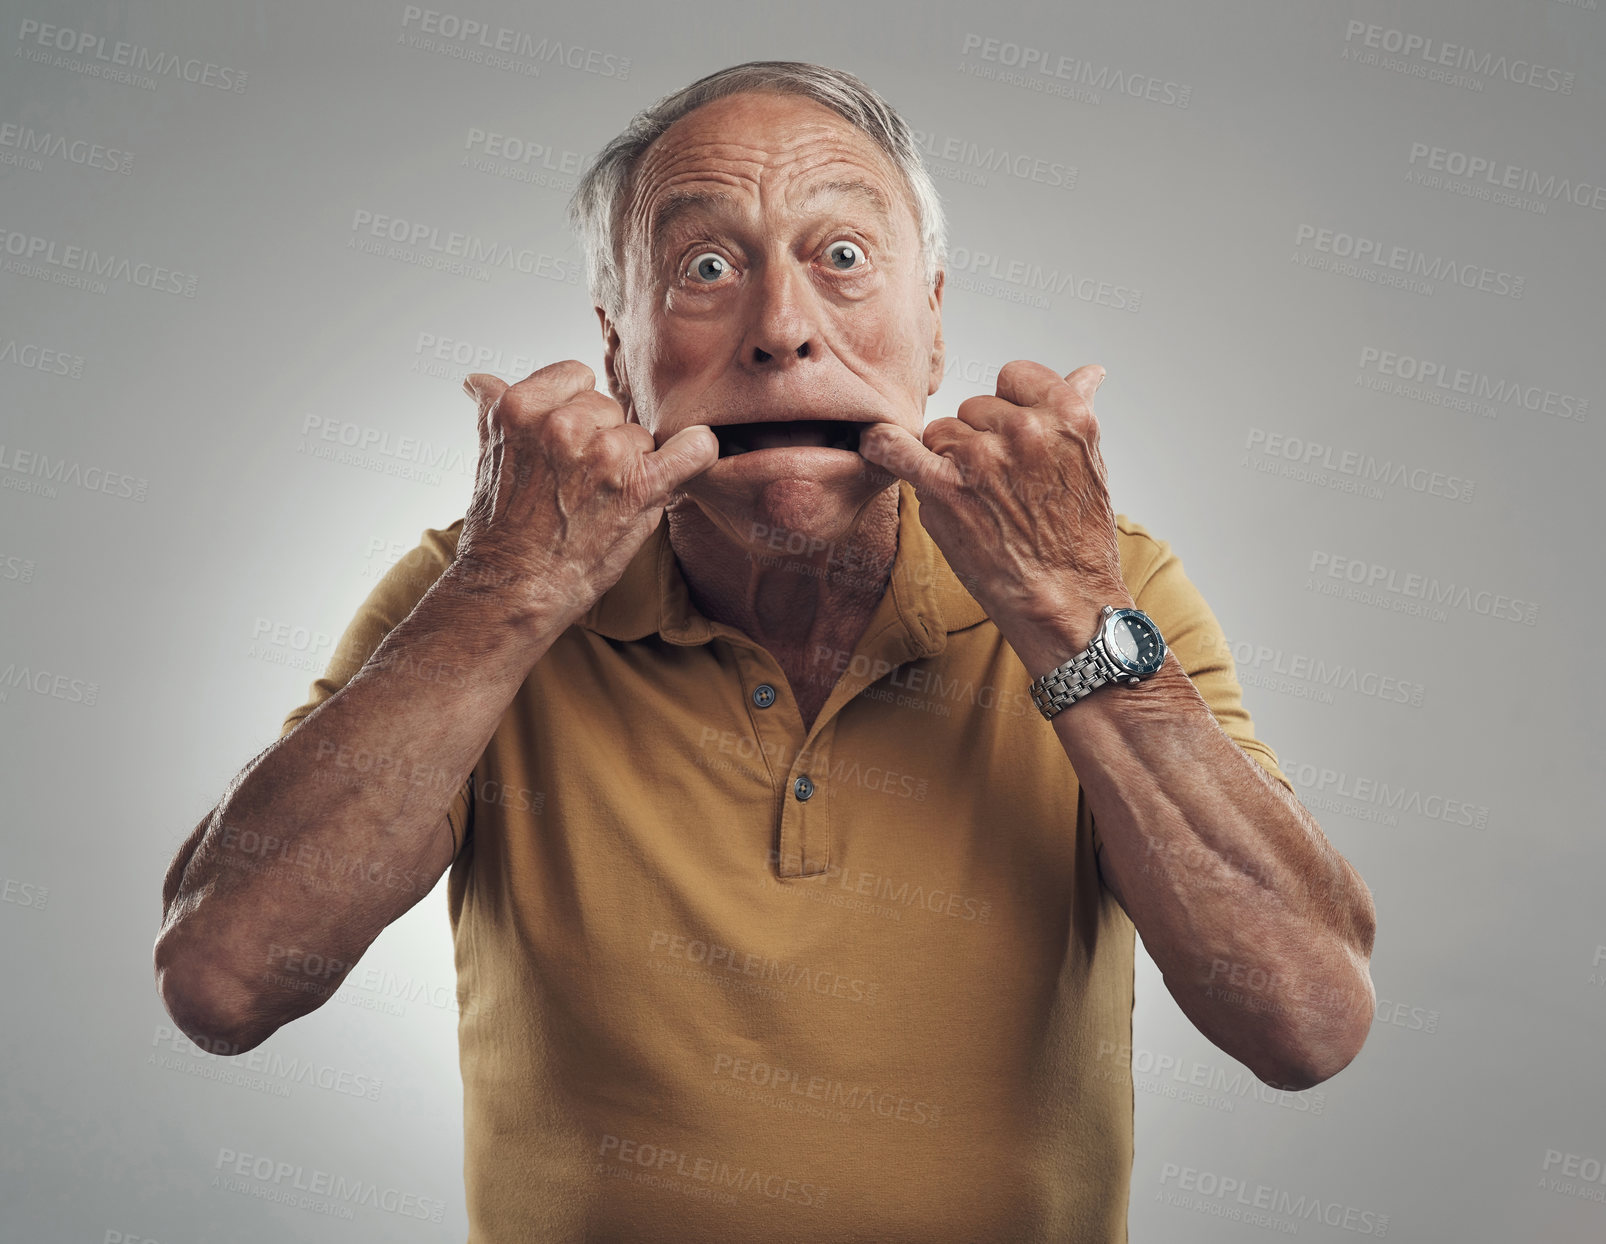 Buy stock photo Studio shot of an elderly man making a funny face against a grey background